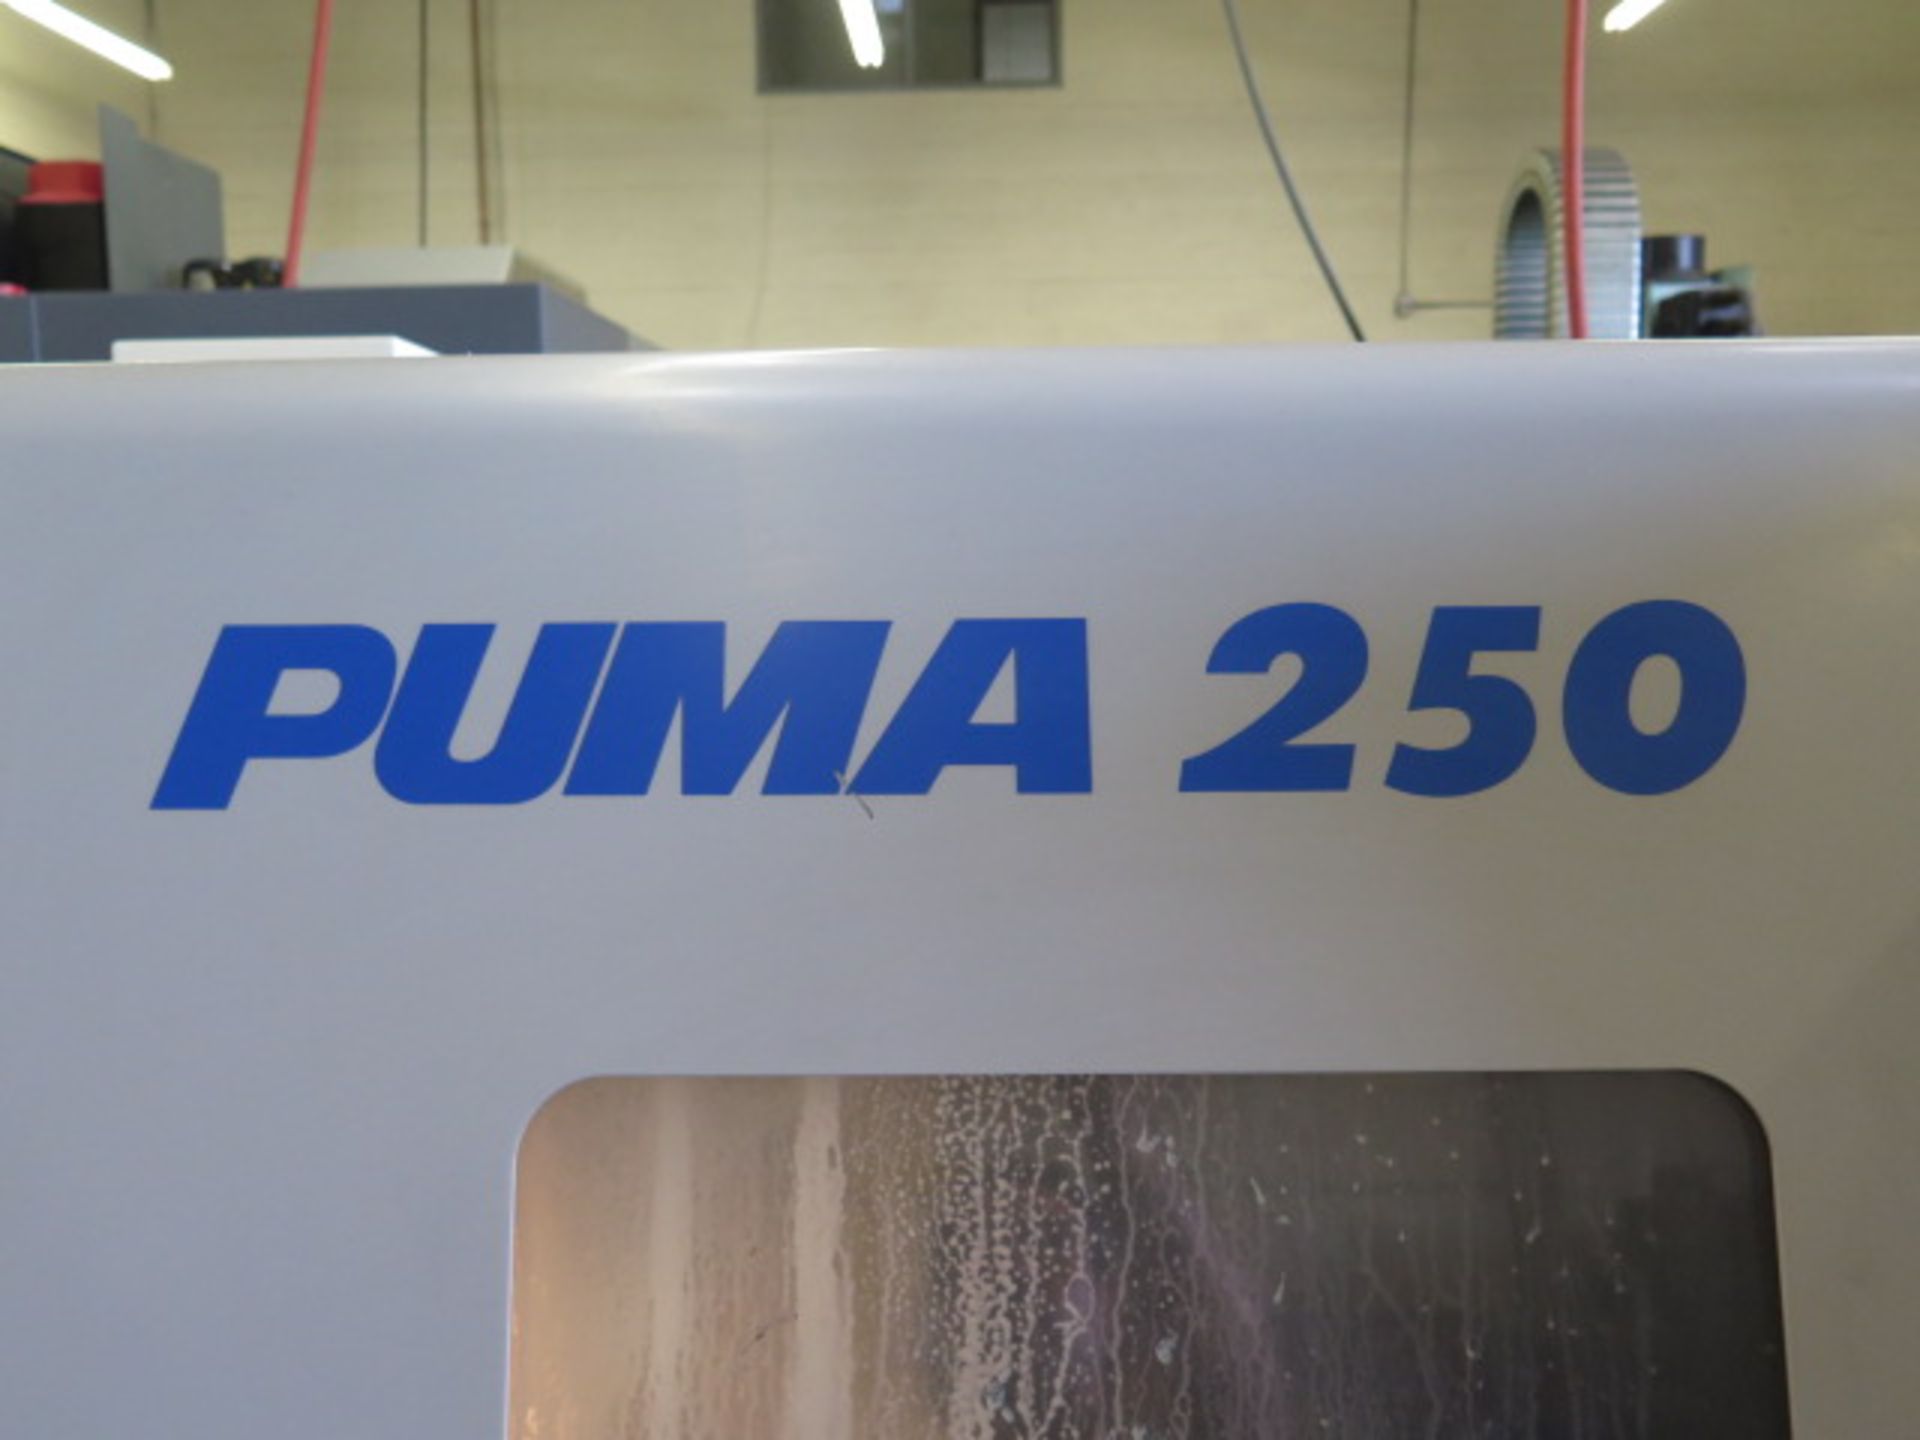 1998 Daewoo PUMA 250B CNC Turning Center s/n PM2500509 w/ Mits Controls, Tool Presetter, SOLD AS IS - Image 12 of 15